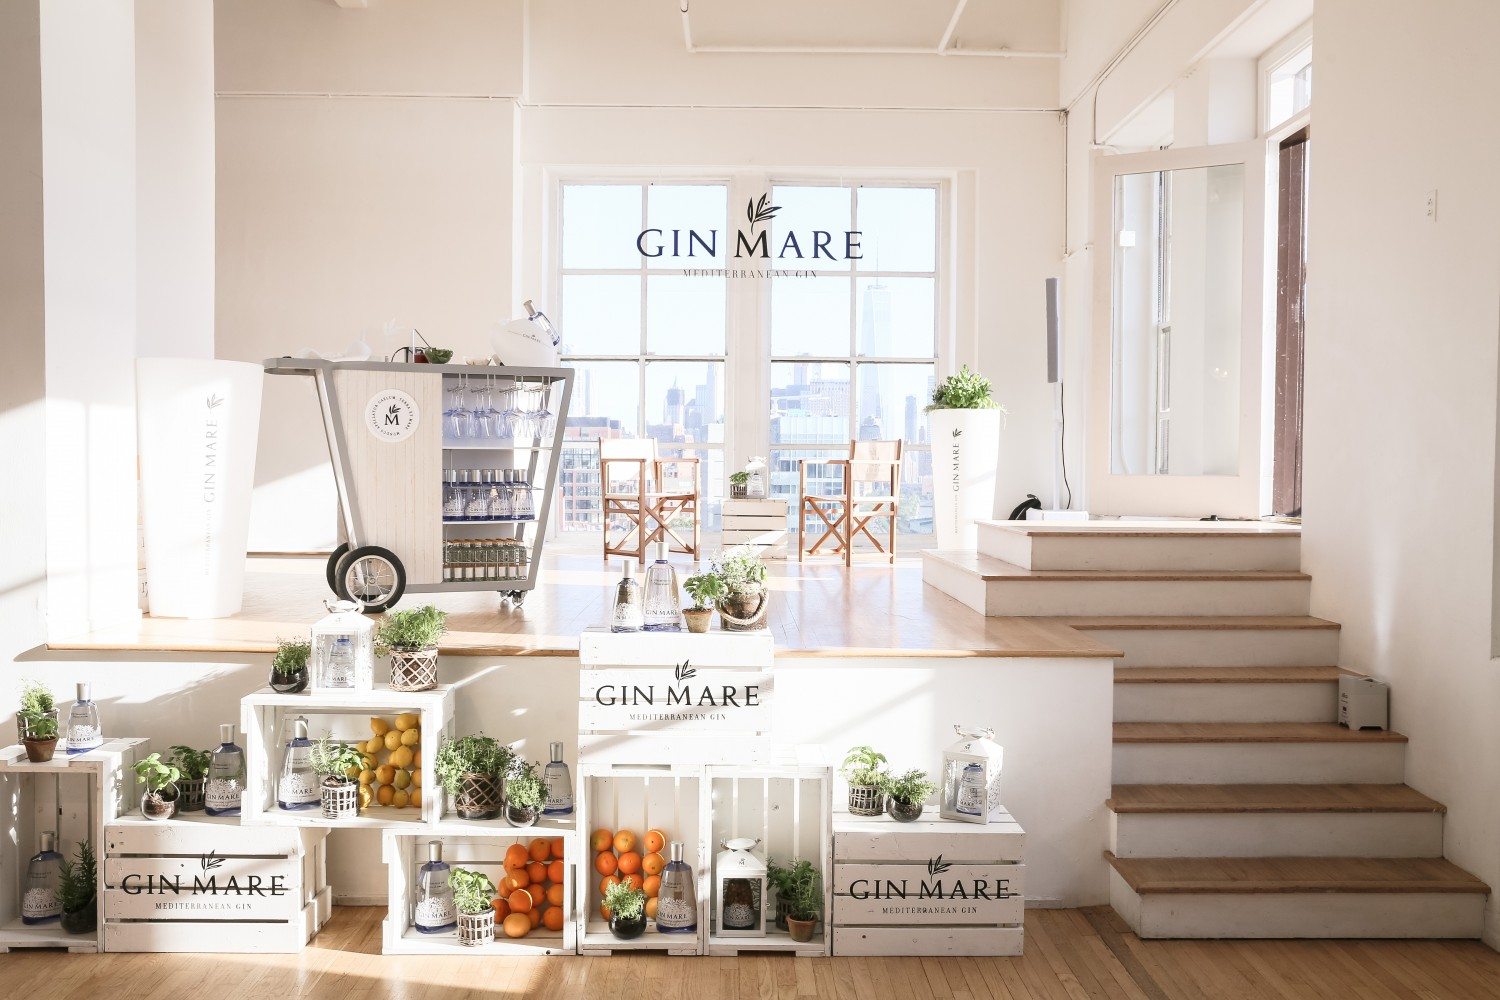 Gin Mare launches in the U.S. with Jun. 9 event; CEO Alfonso Morodo talks to Downtown